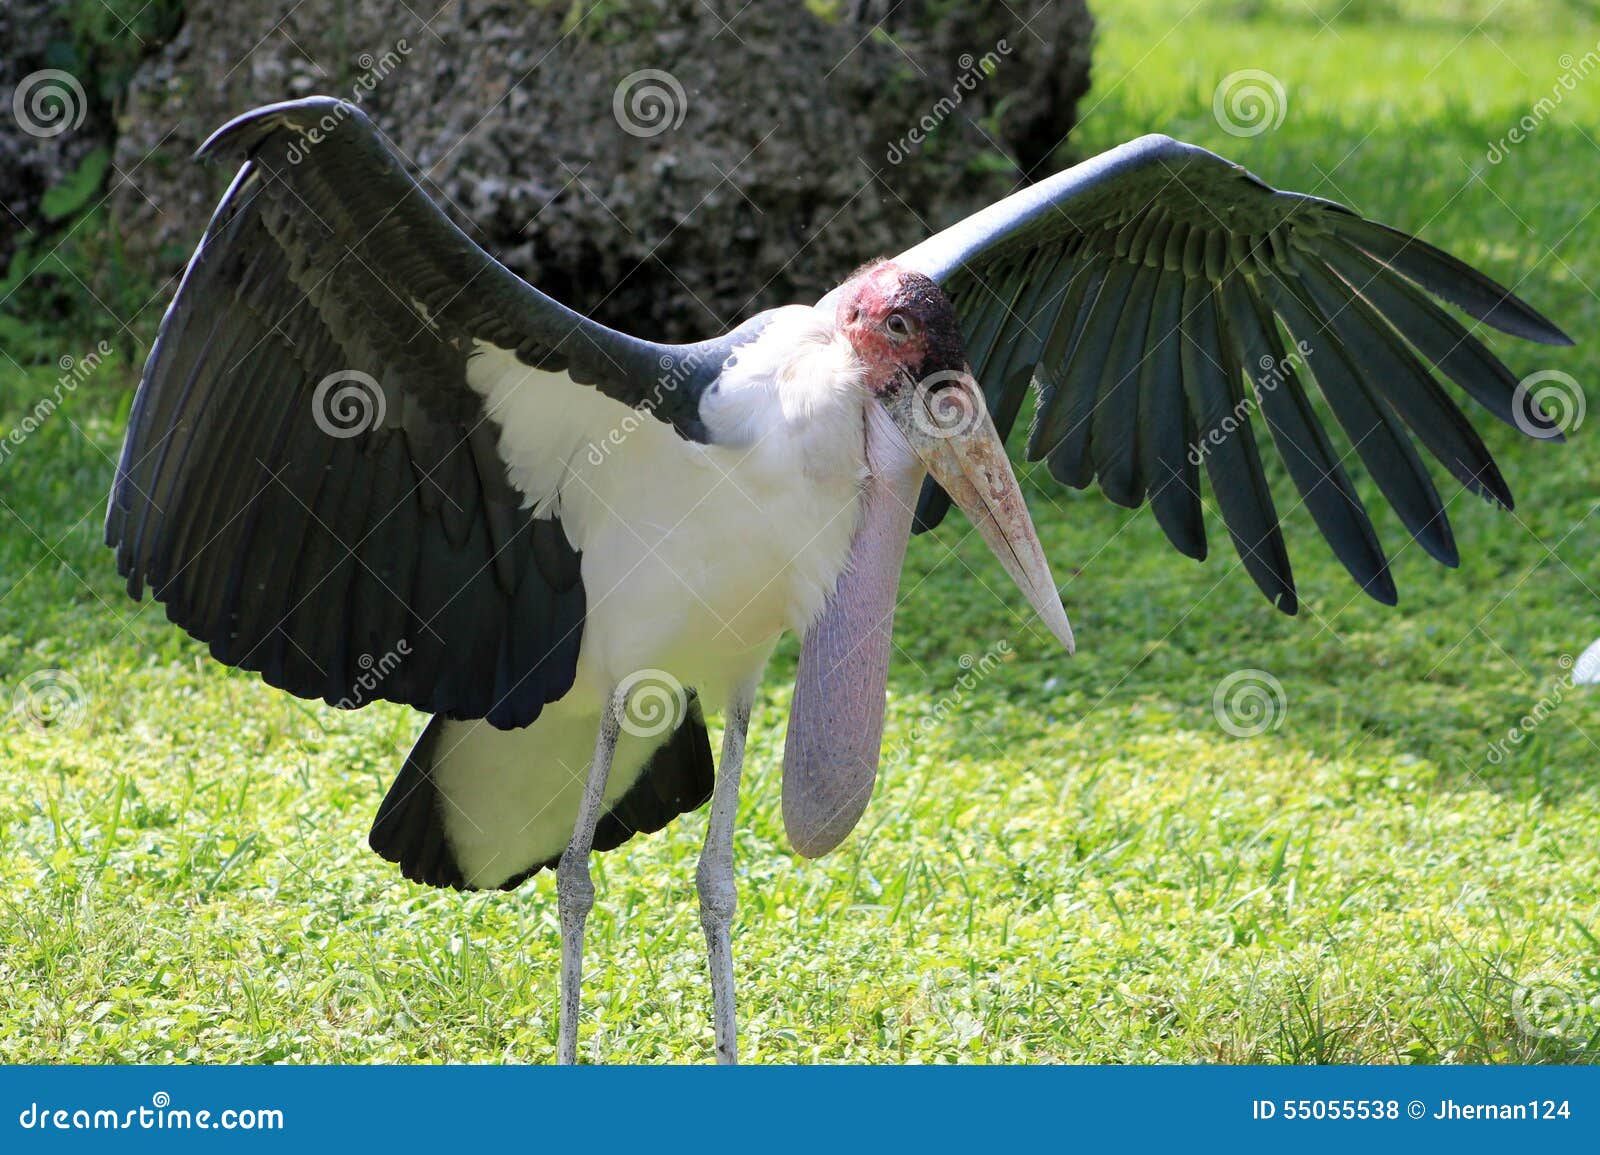 stork spreading its wings